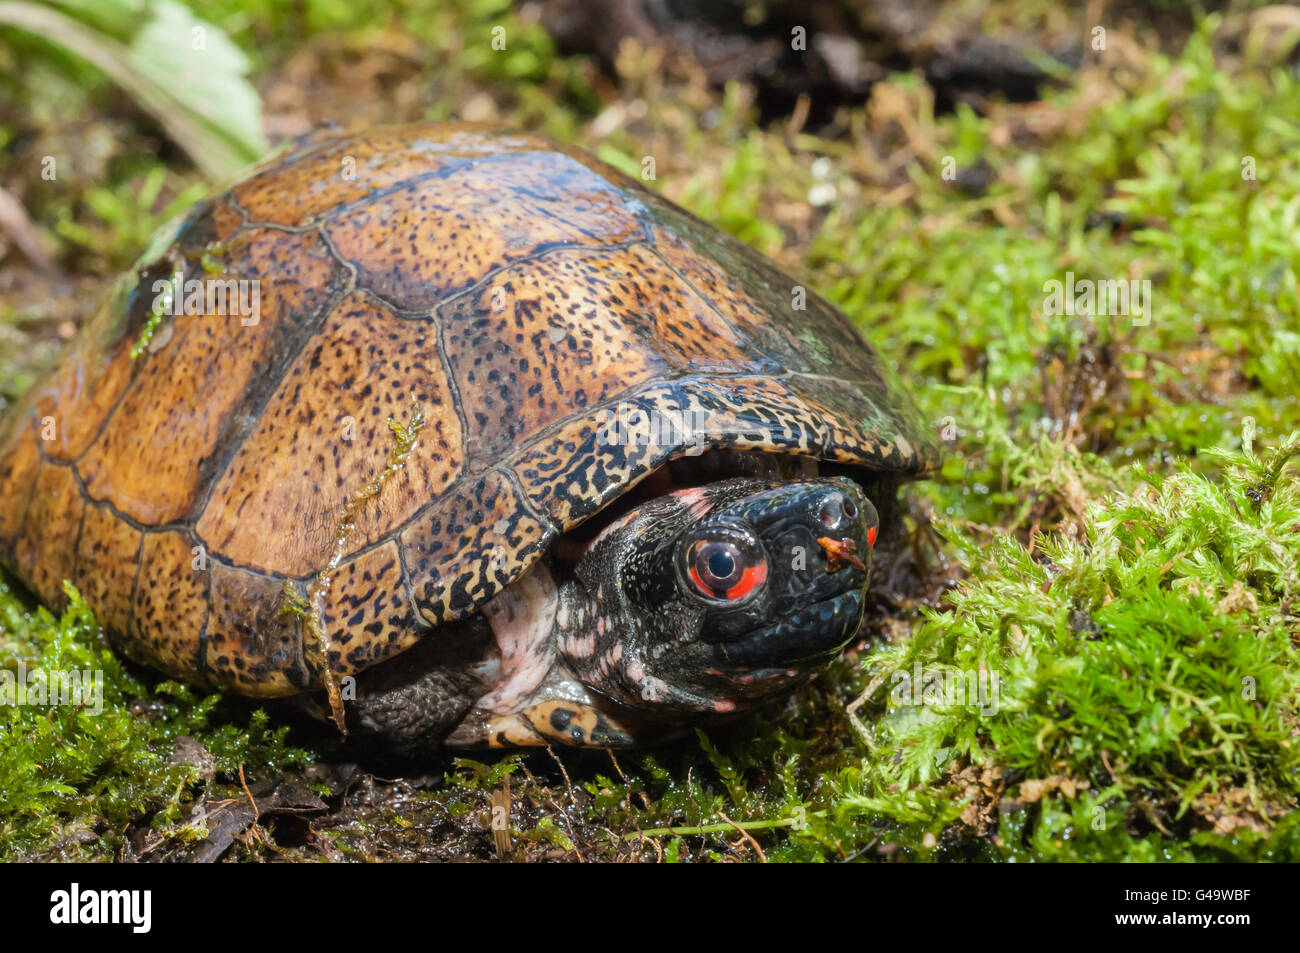 Beal's eyed turtle or Four-eyed turtle, Sacalia bealei, native to Southern China and Northern Vietnam Stock Photo